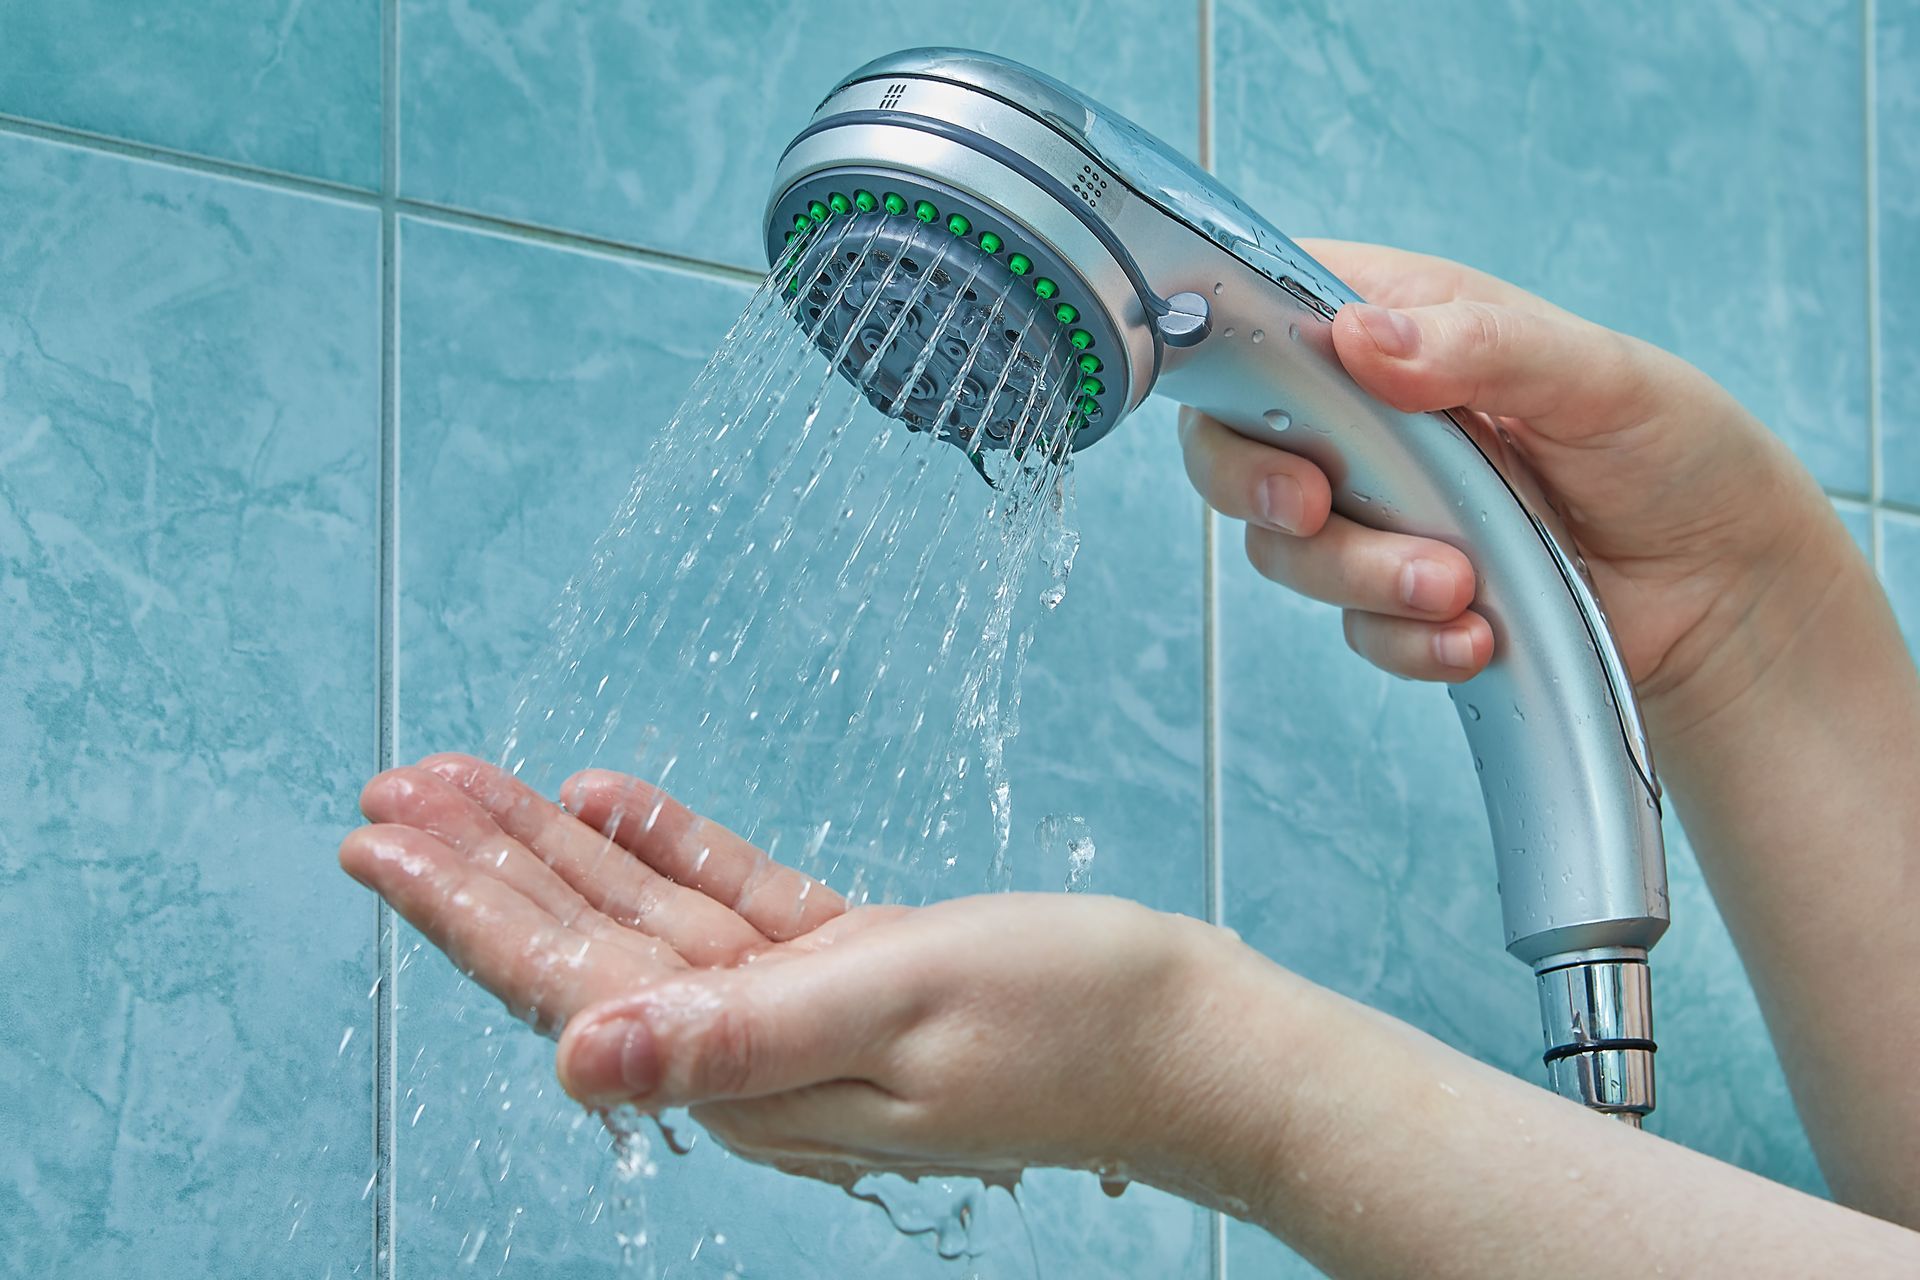 A person is holding a shower head with water coming out of it